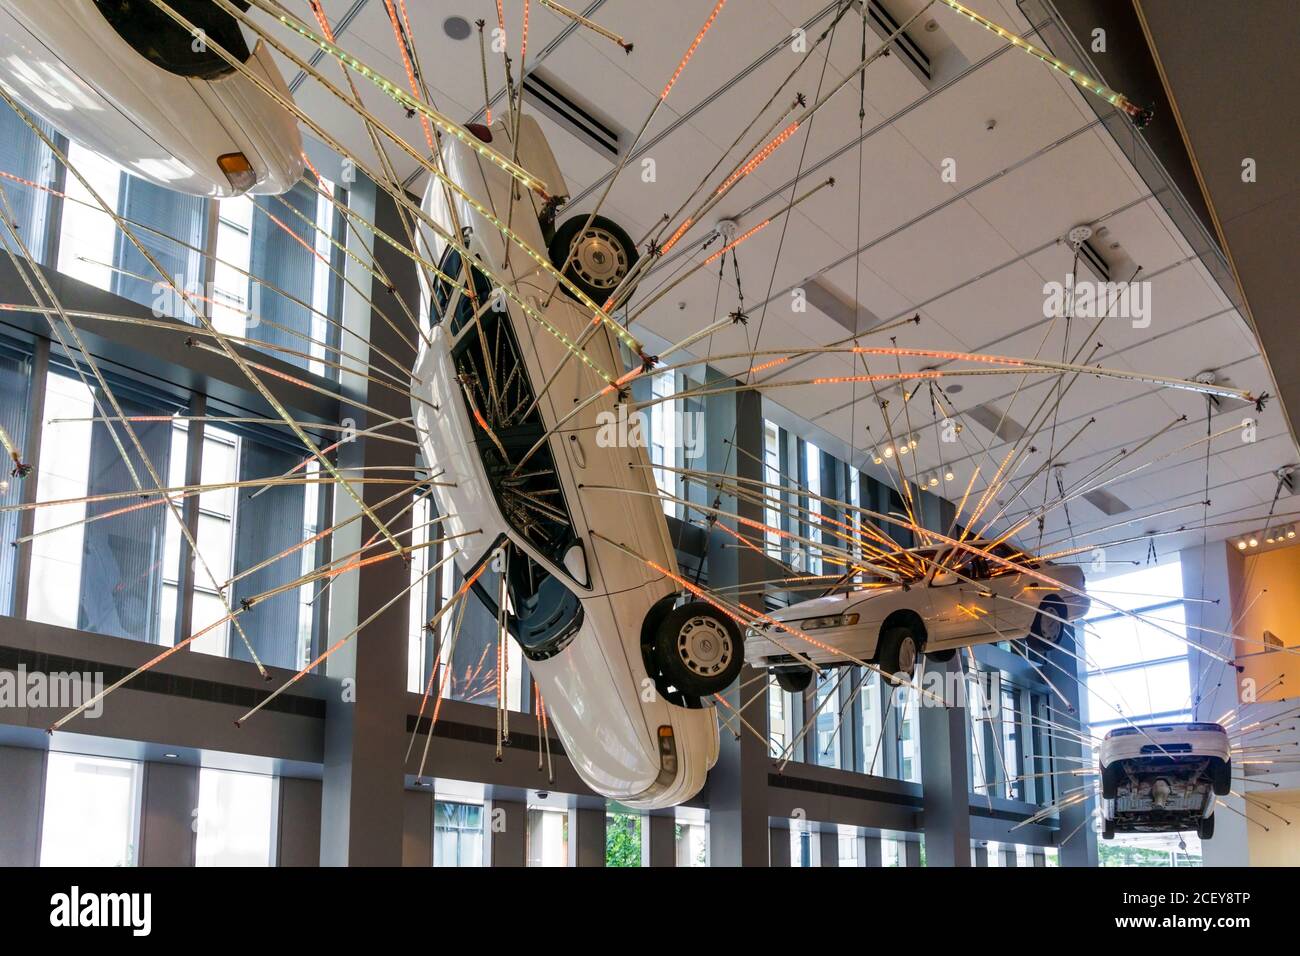 Inopportune: Stage One by Chinese artist Cai Guo-Qiang in the entrance foyer to Seattle Art Museum, SAM. Stock Photo